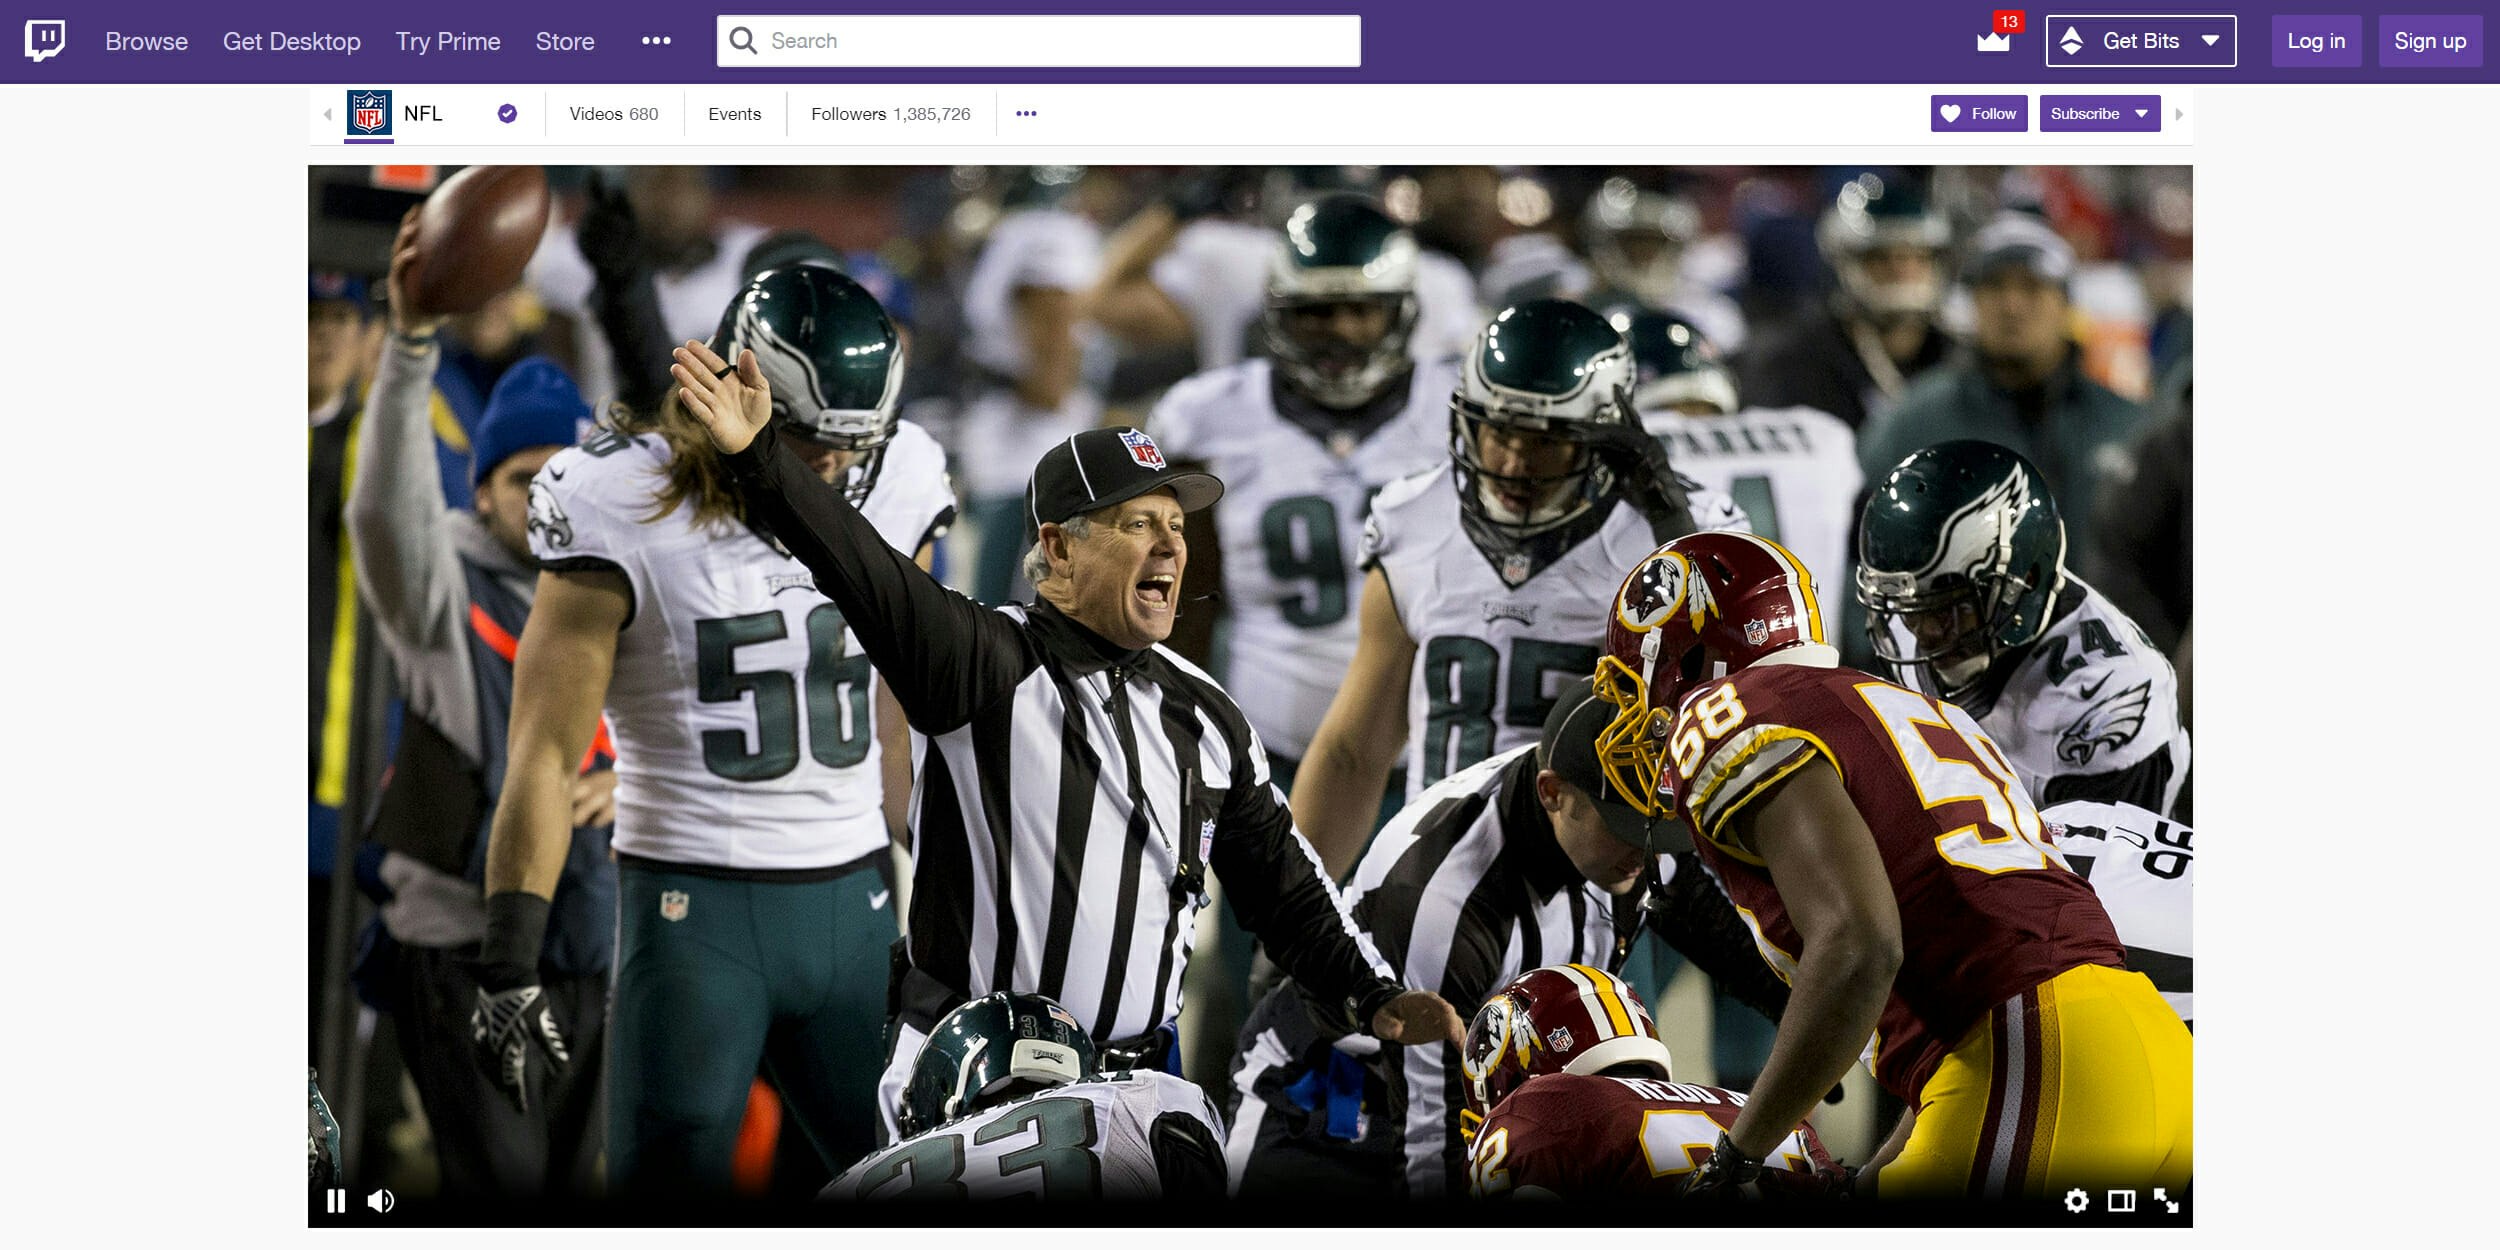 How to Watch Thursday Night Football for Free on Twitch